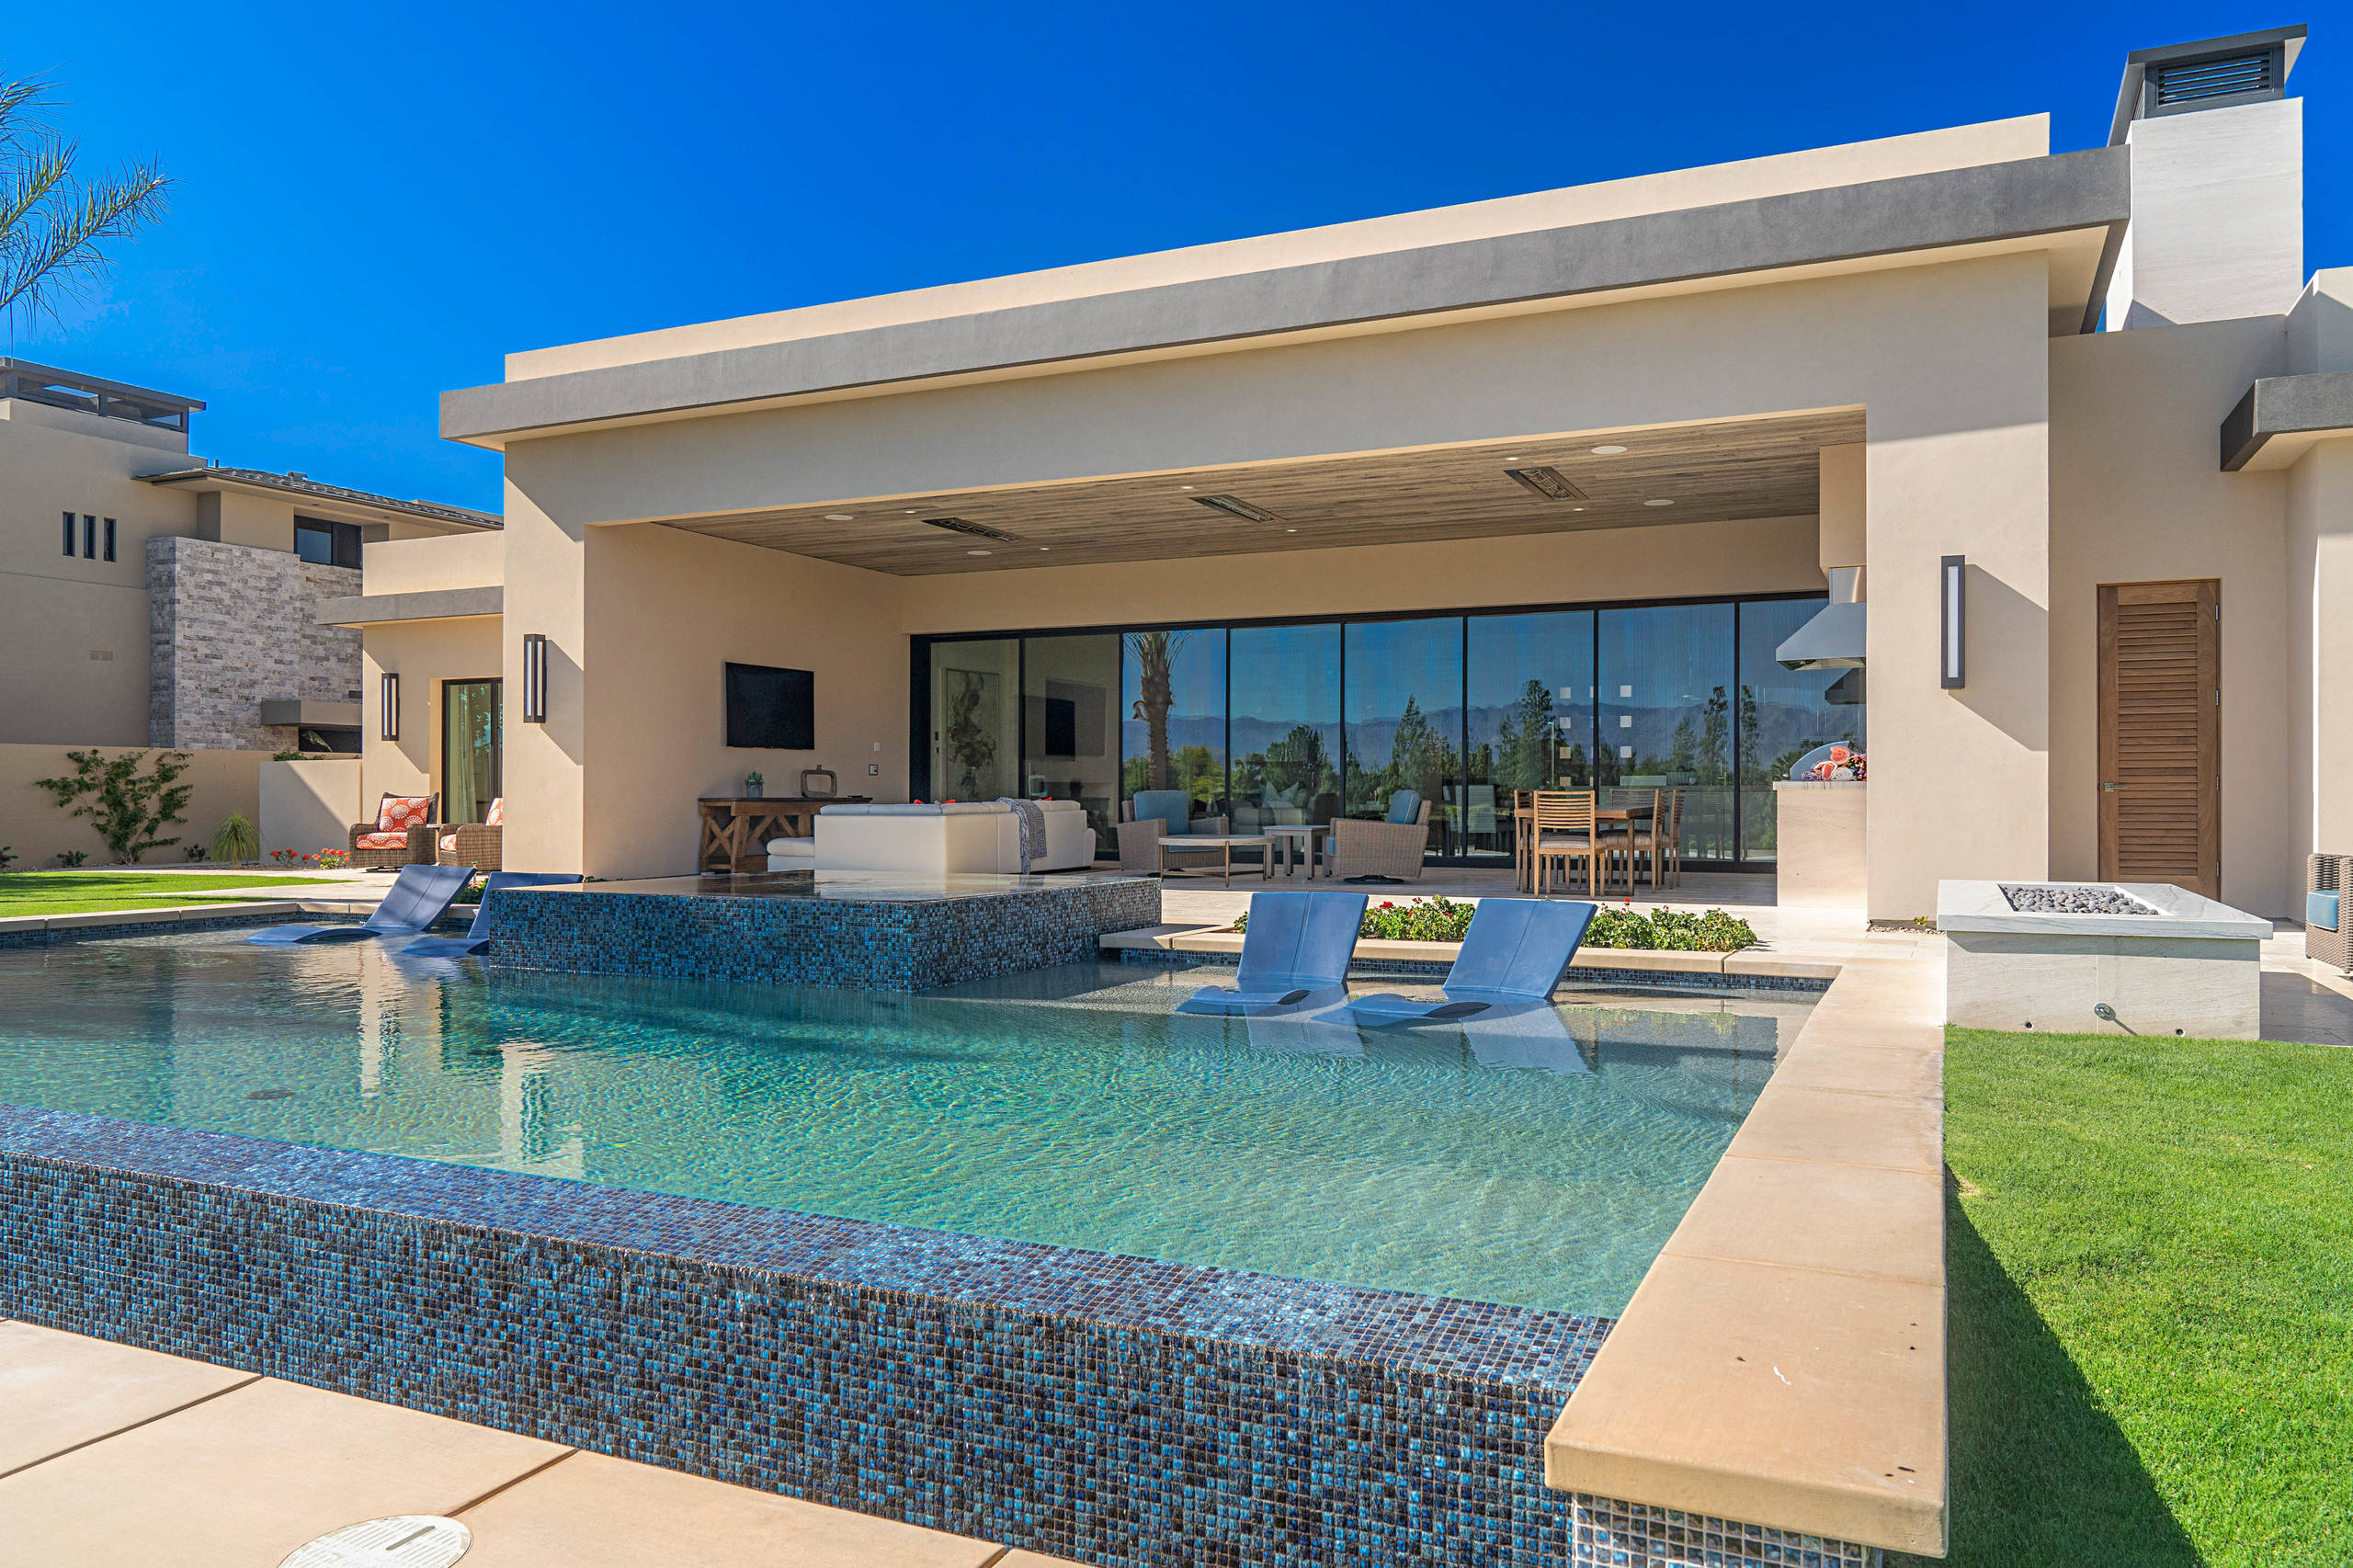 75 Beautiful Aboveground Pool Pictures Ideas December 2020 Houzz